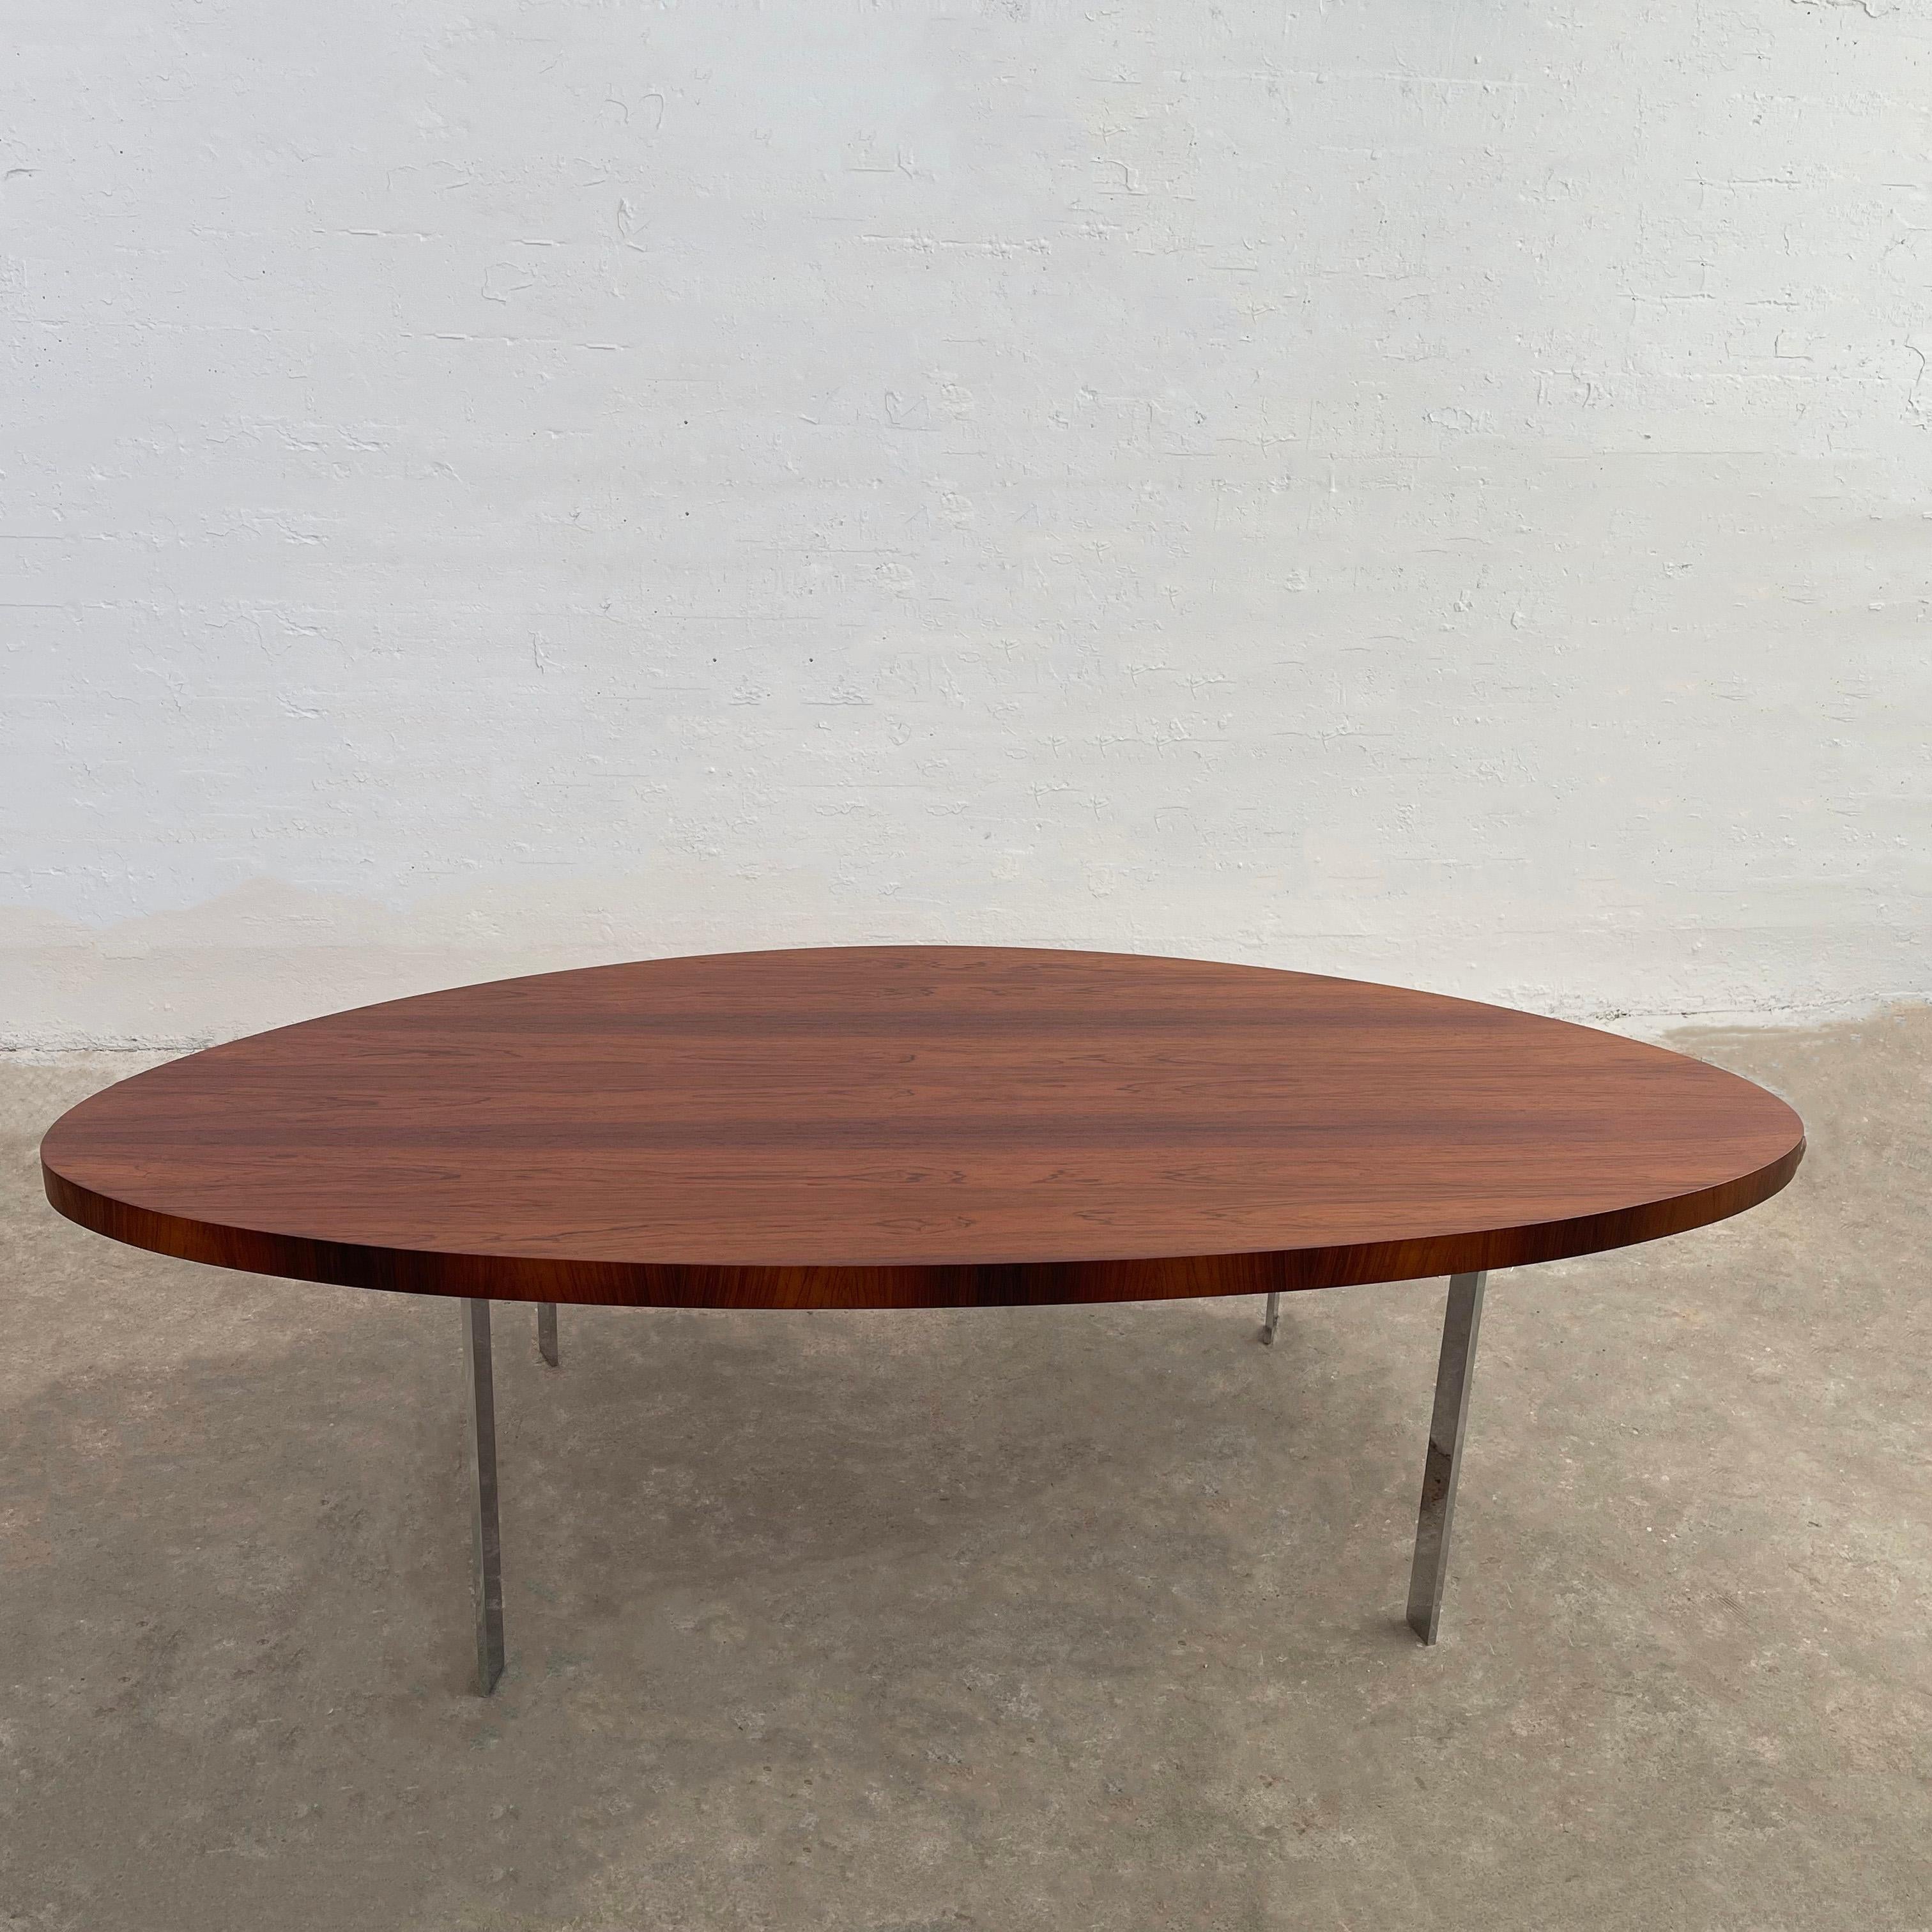 Large, Scandinavian modern, coffee table circa 1970's features a peaked oval or rounded triangular shaped, rosewood top with beautiful grain on angled, flat bar chrome legs. It's a uniquely shaped table that offers design flexibility.